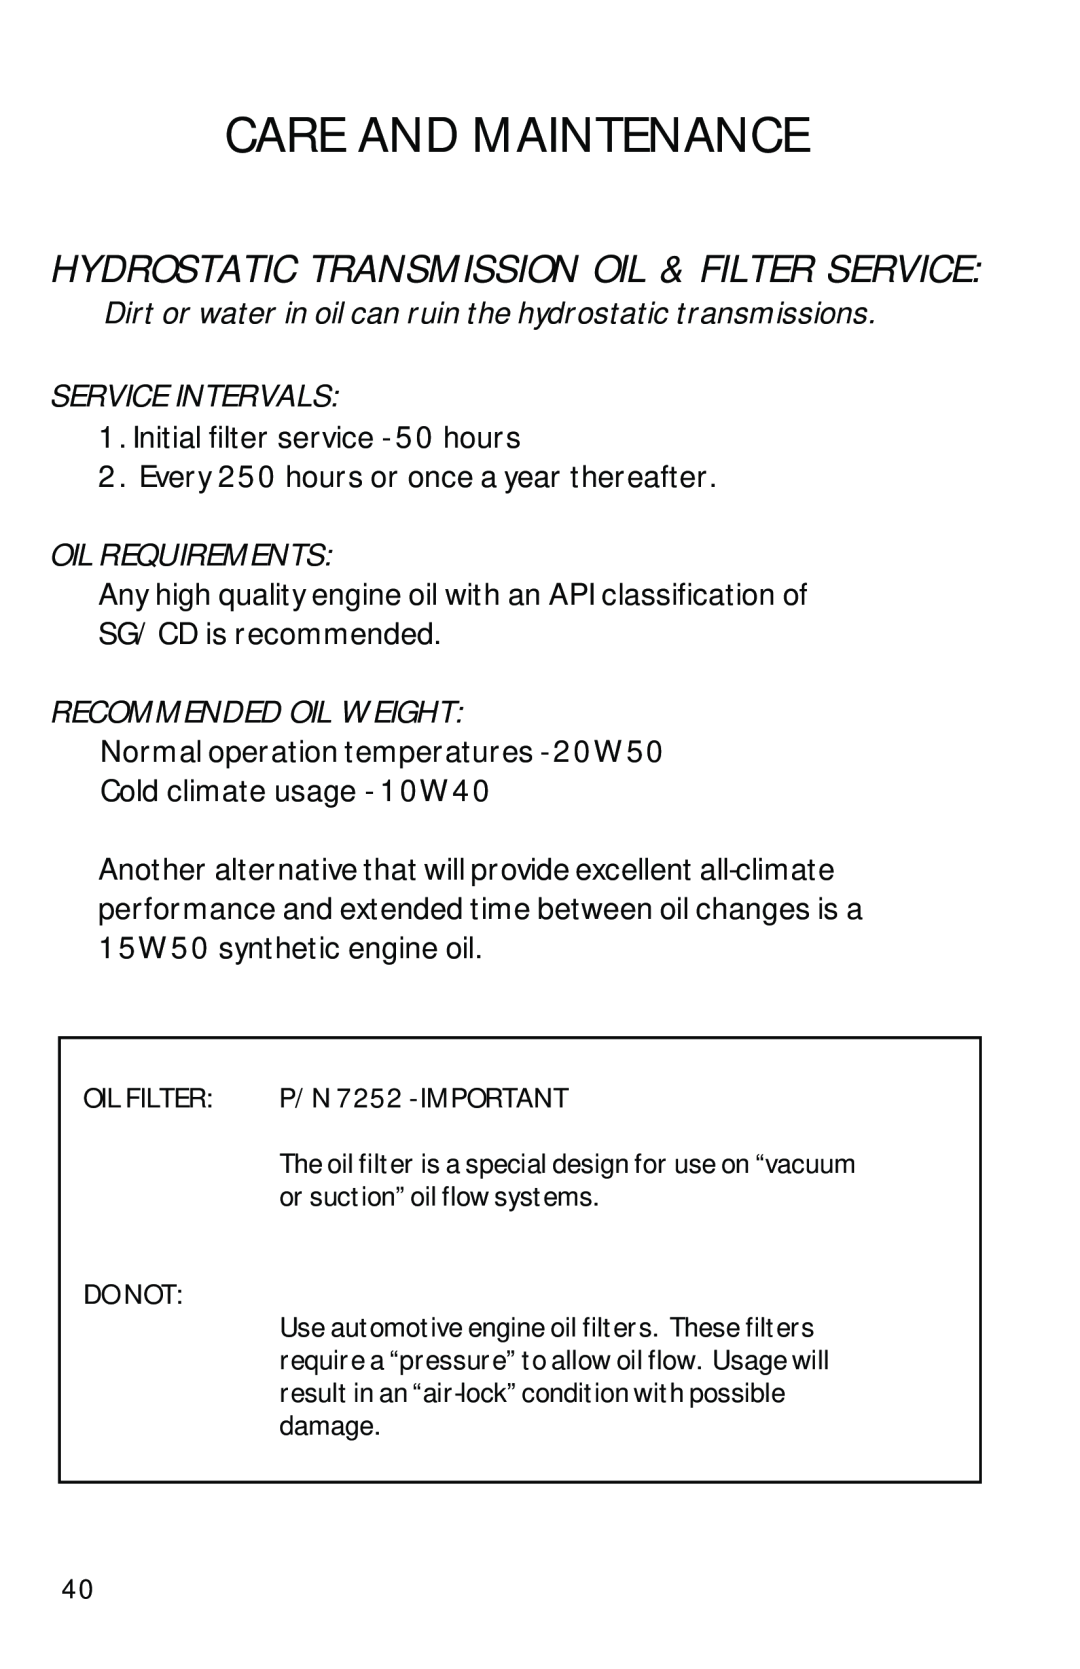 Dixon 1950-2300 Series manual Hydrostatic Transmission Oil & Filter Service, Service Intervals, Oil Requirements 